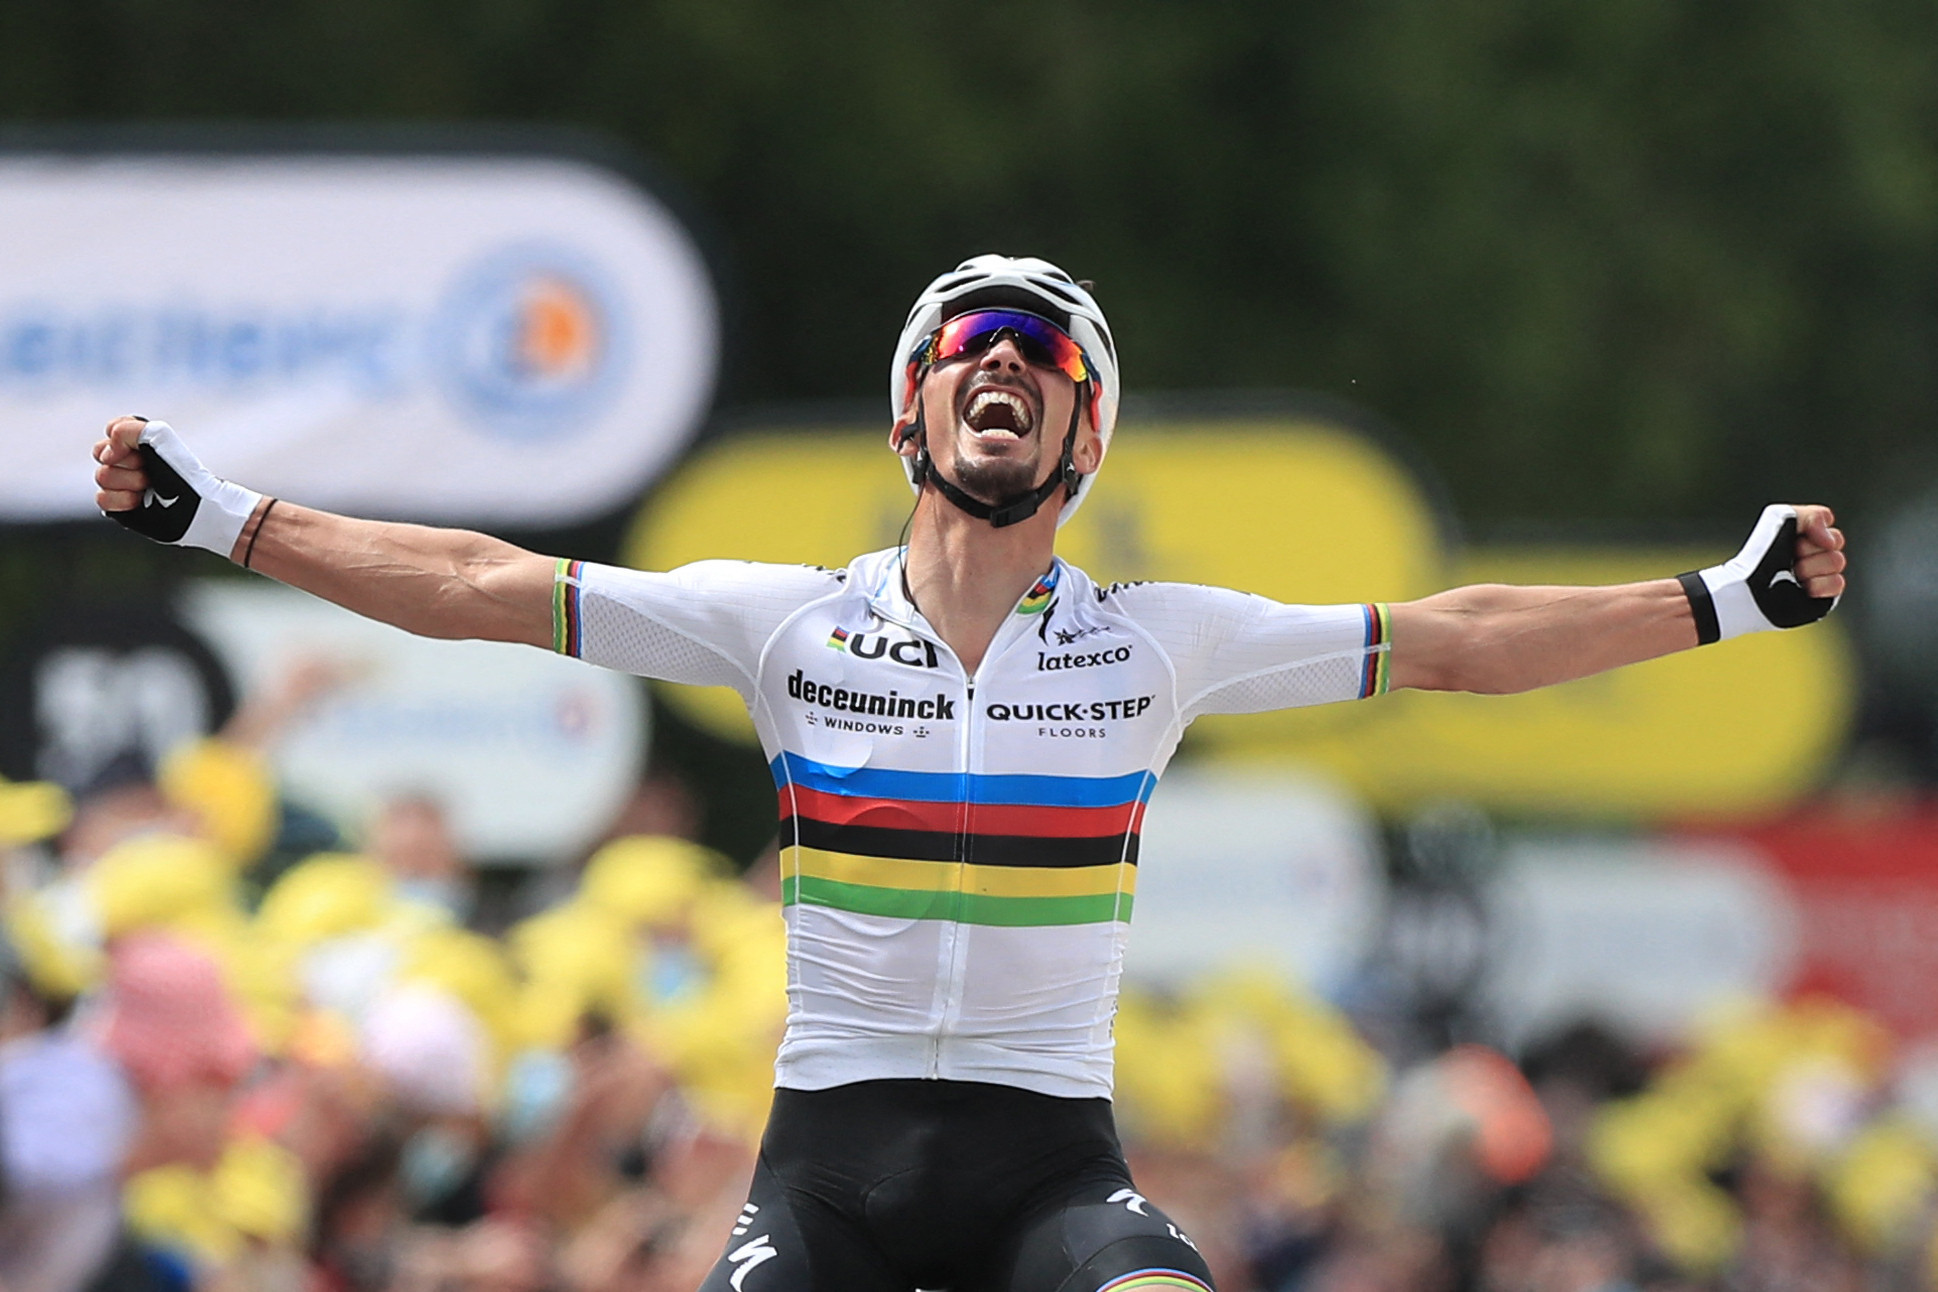 Julian Alaphillipe, who successfully defended his road race world title earlier this year, will be among the contenders in Il Lombardia ©Getty Images